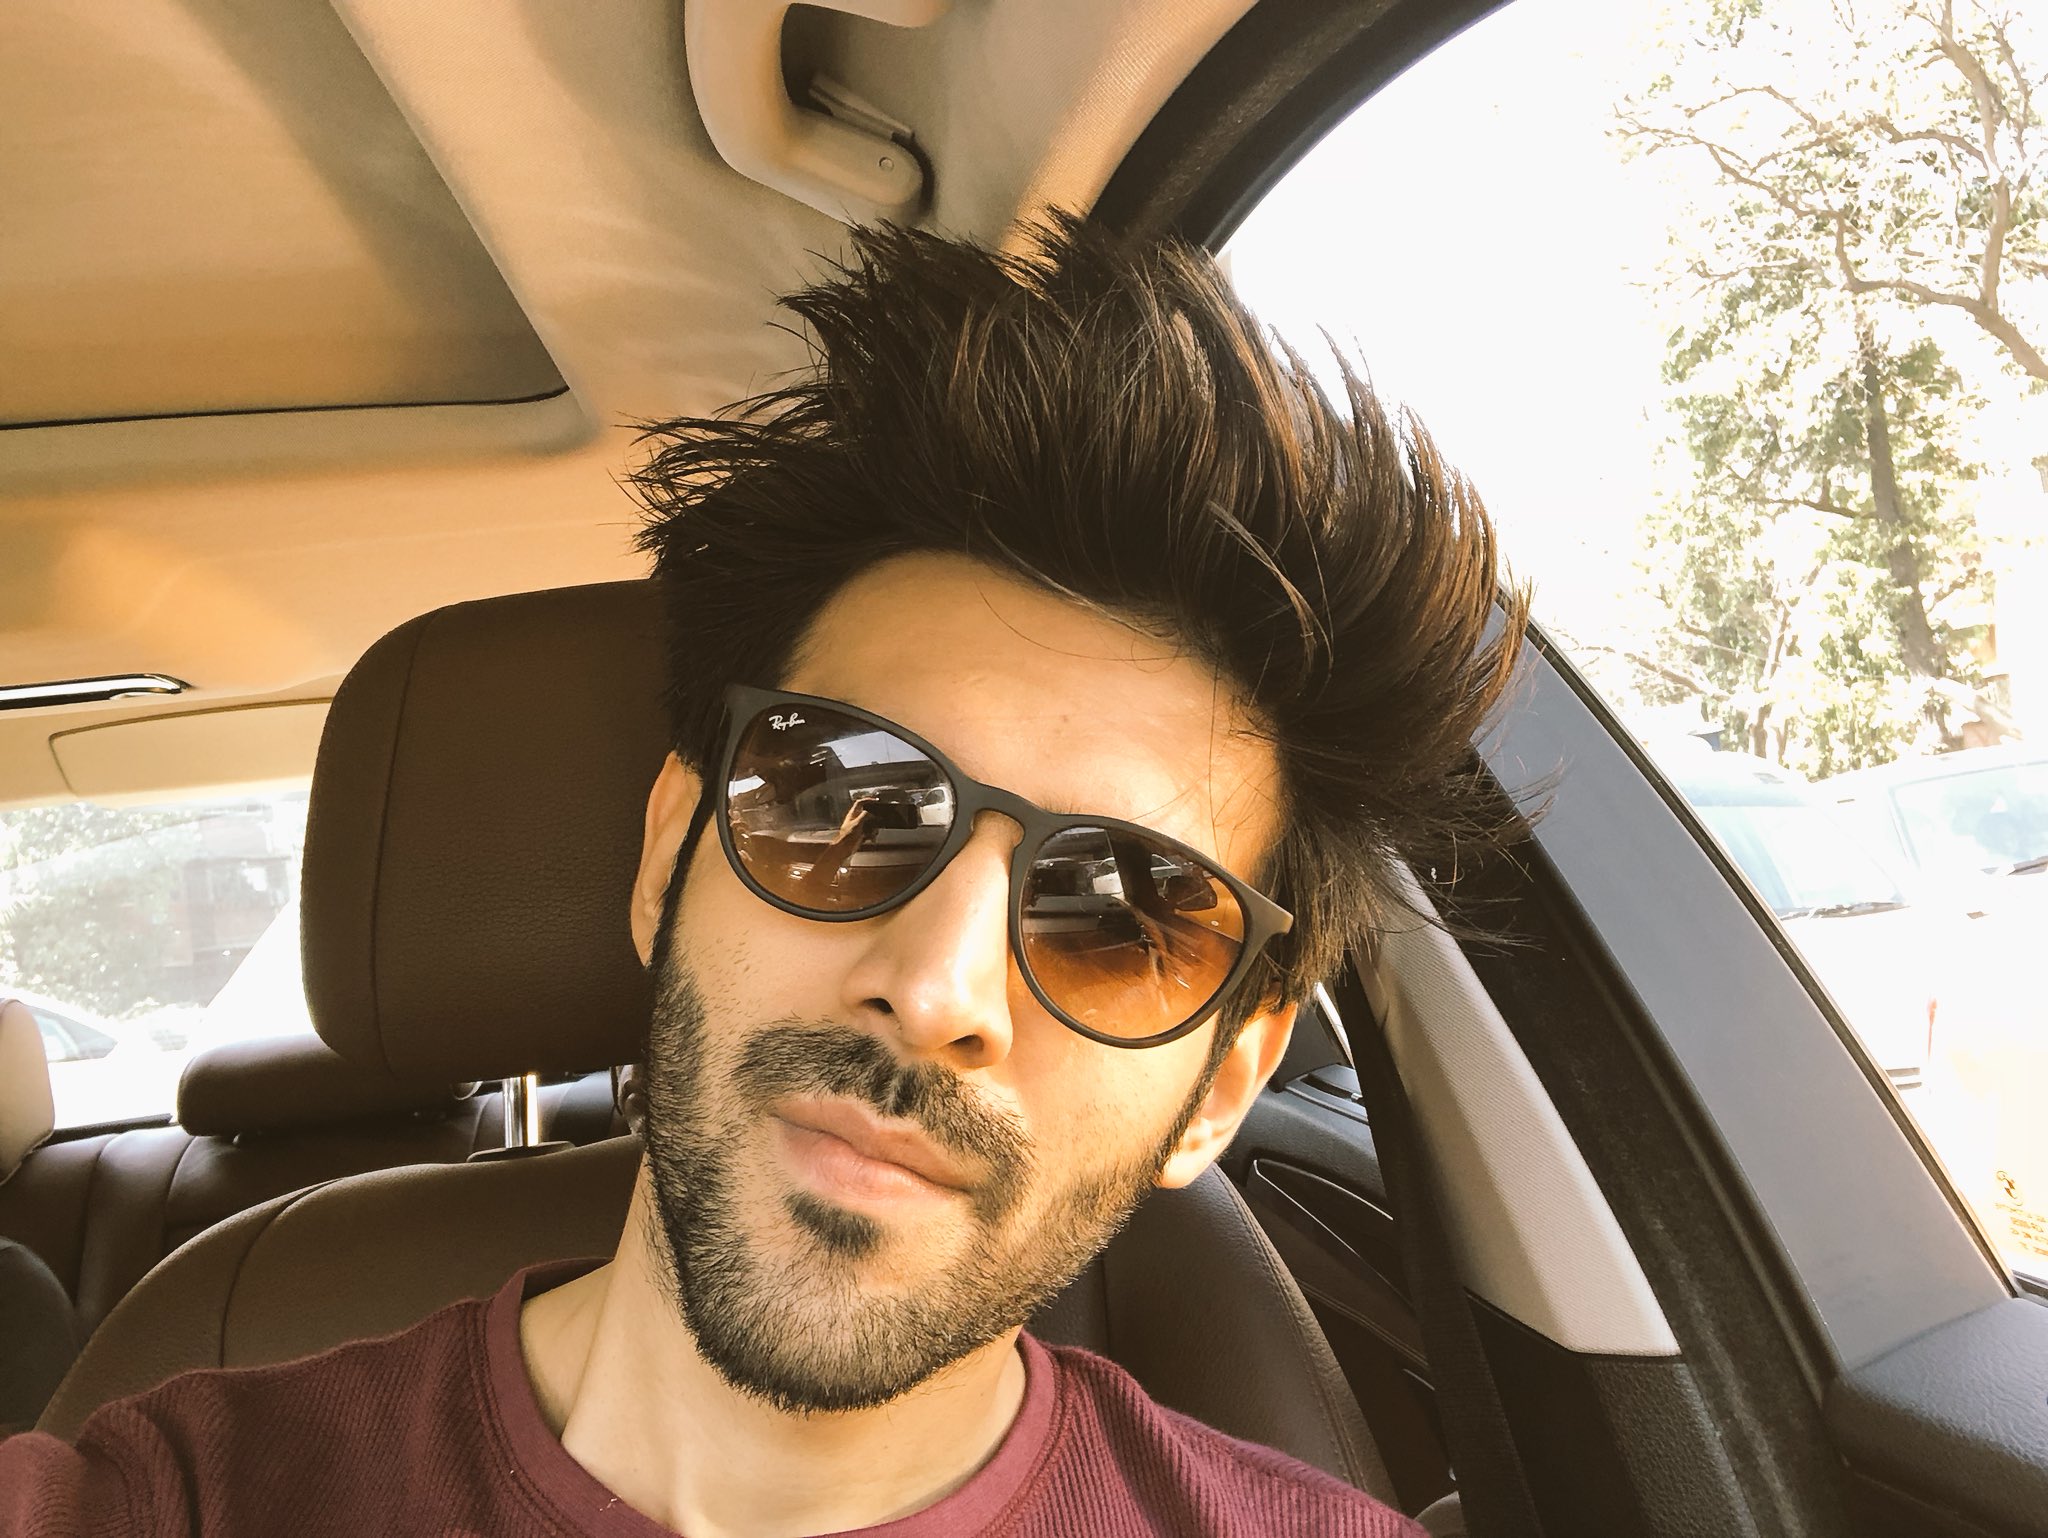 Kartik Aaryan Hairstyle and Hairstyle Tips - HELLO! India